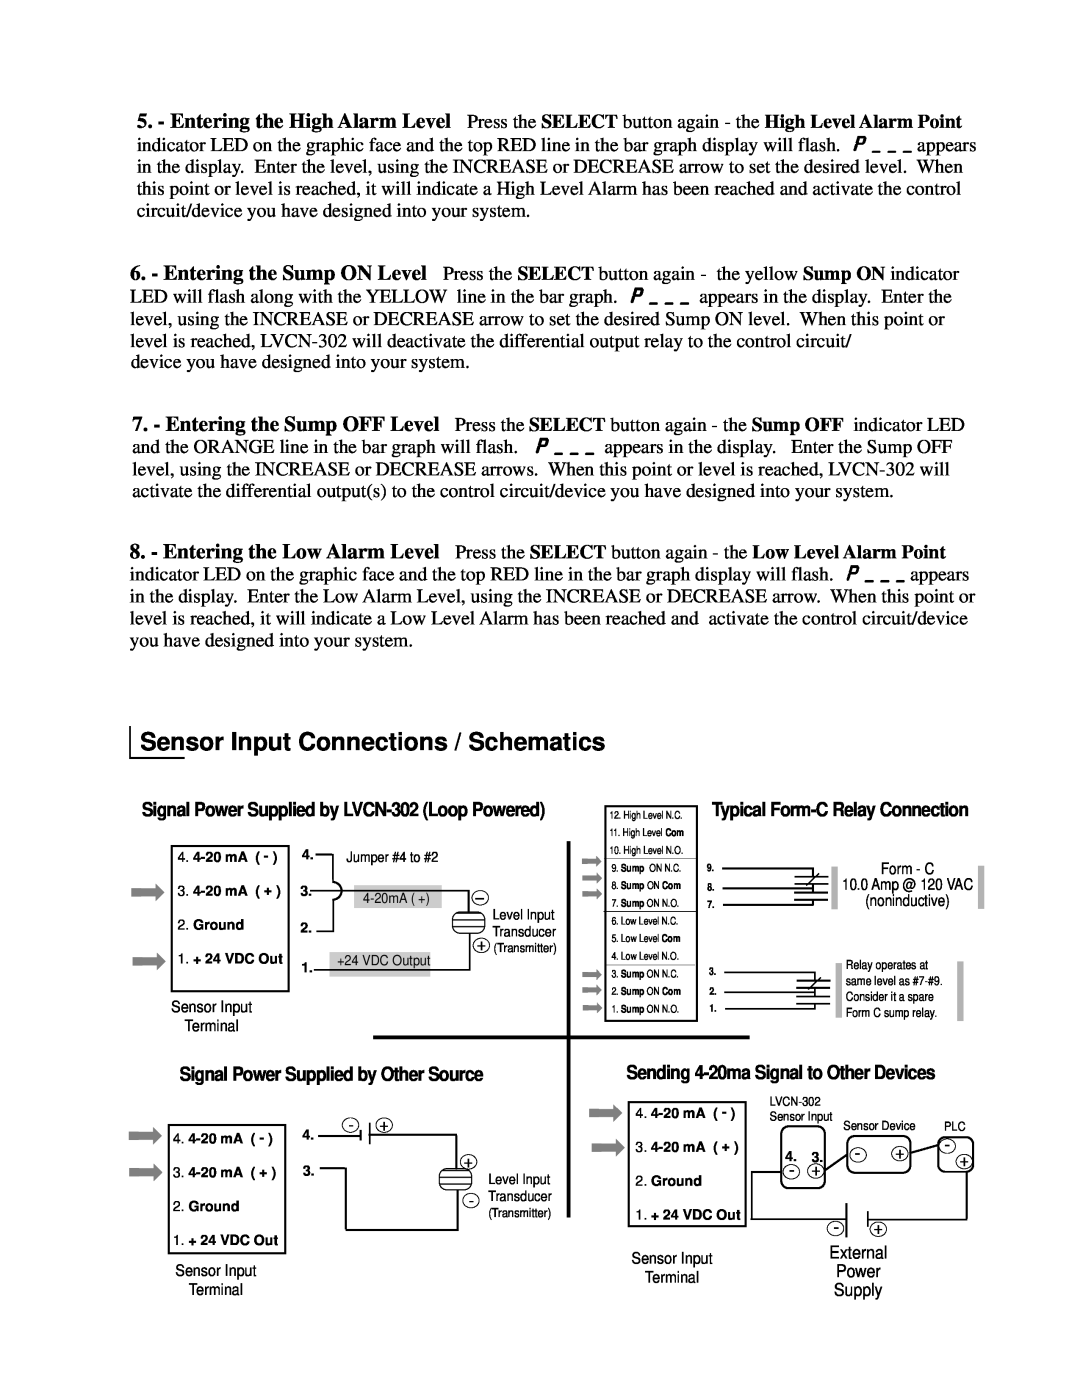 Omega Engineering LVCN-302 specifications Sensor Input Connections / Schematics, Signal Power Supplied by Other Source 